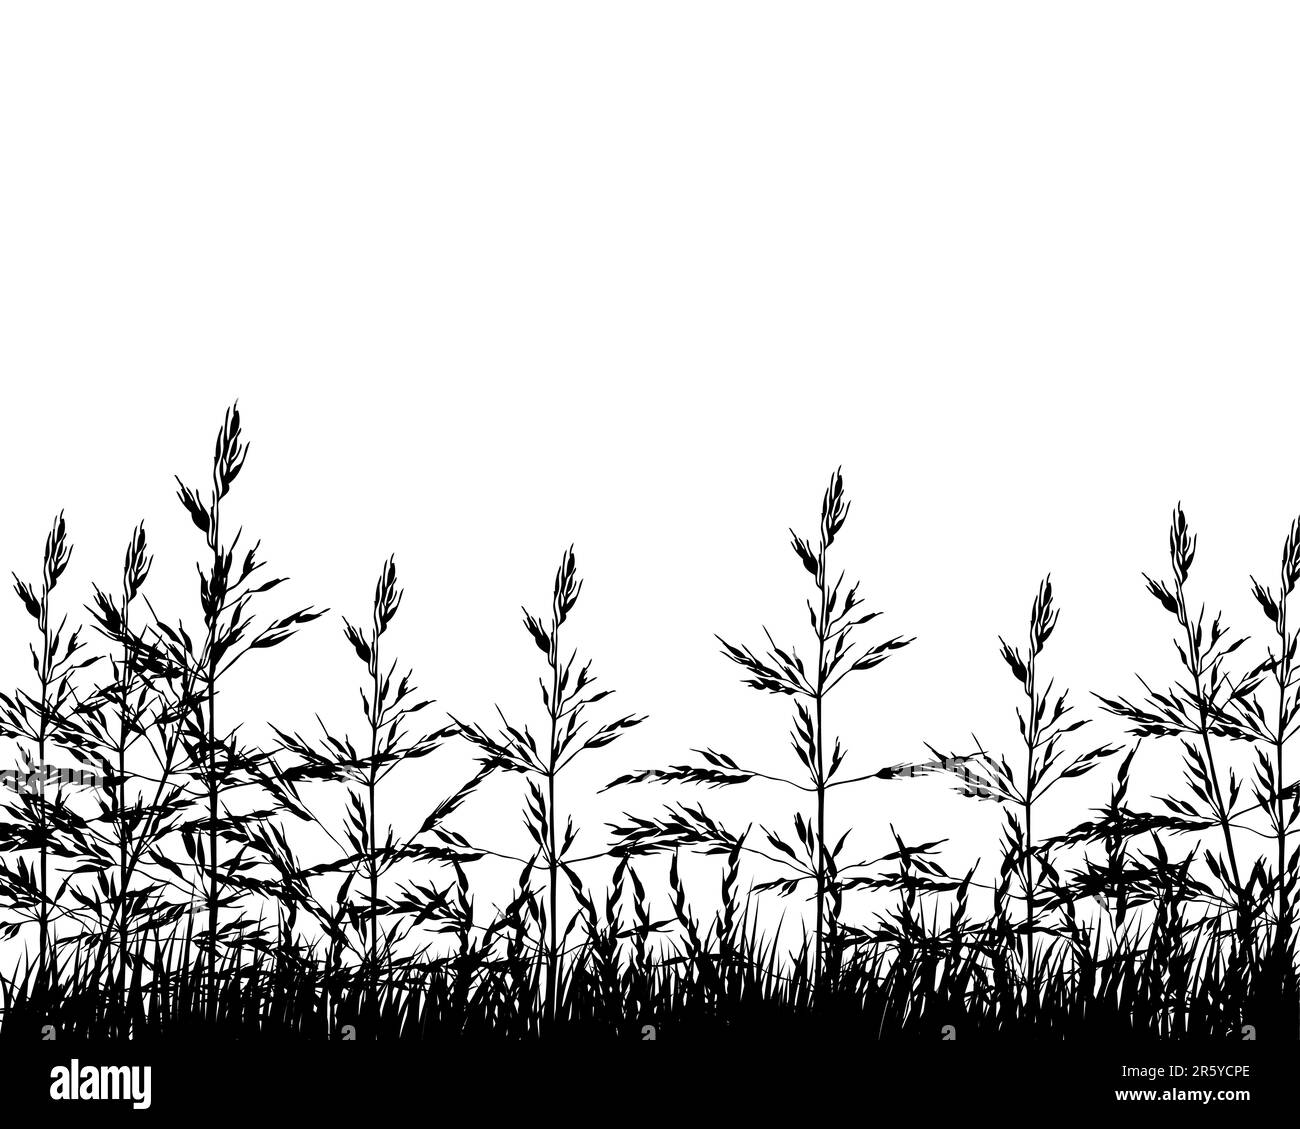 Vector illustration wheat background for design use Stock Vector